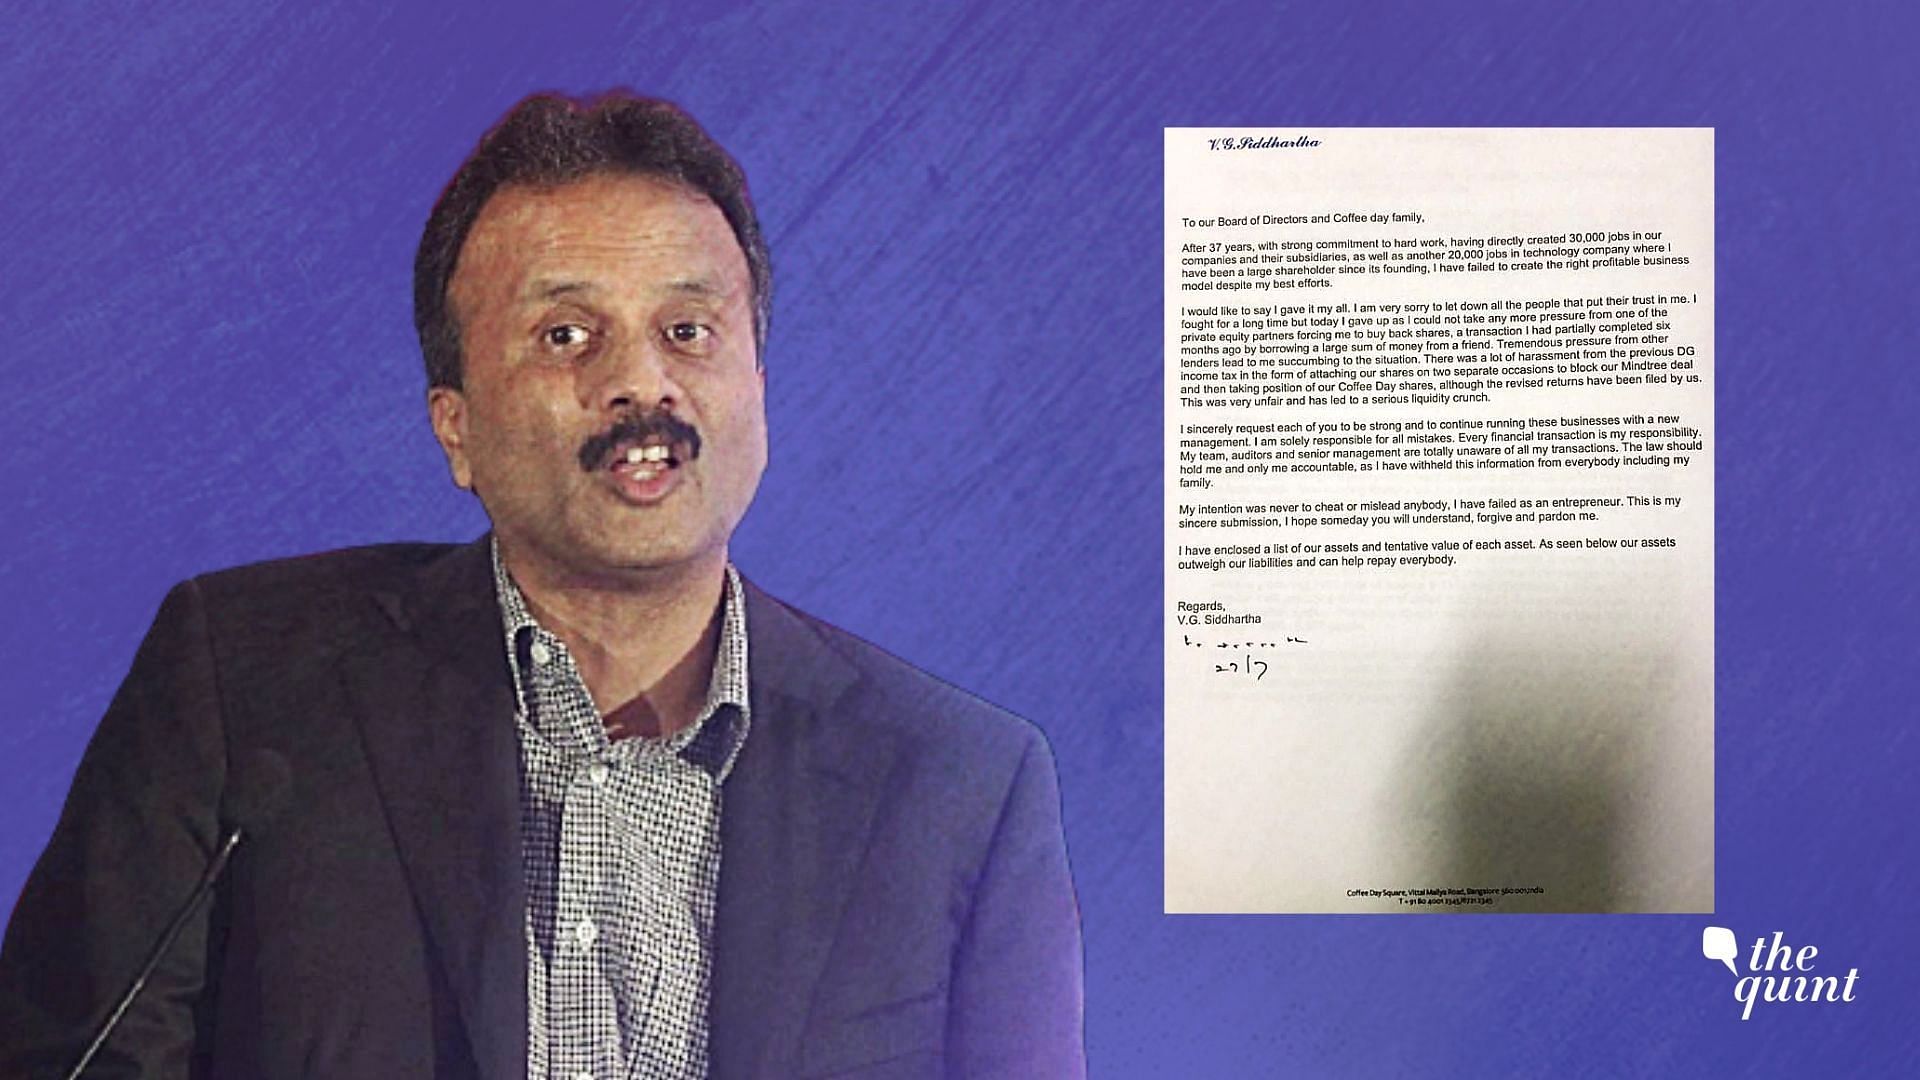 In a heartfelt letter addressed to the “Board of Directors and Coffee Day family,” founder-owner VG Siddhartha said that he has “failed as an entrepreneur”.